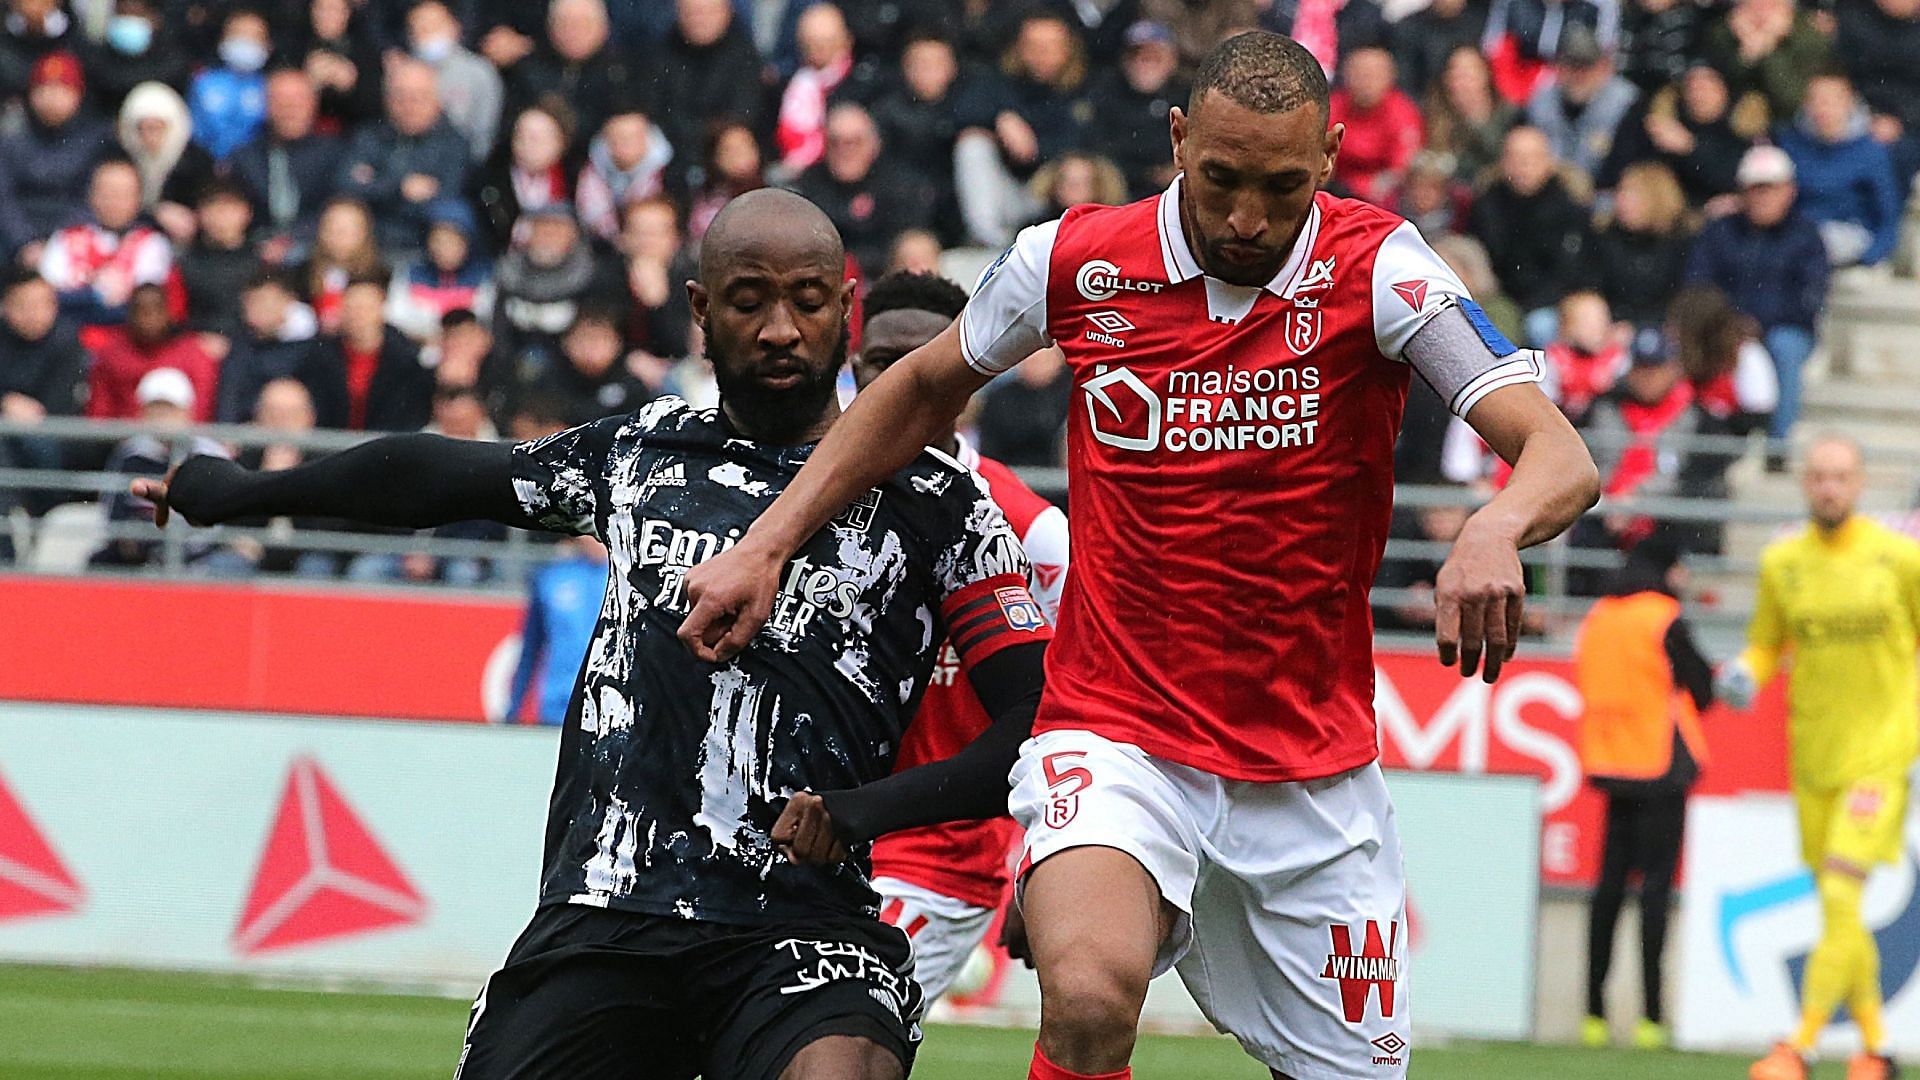 Reims will host Lyon in Ligue 1 action on Sunday